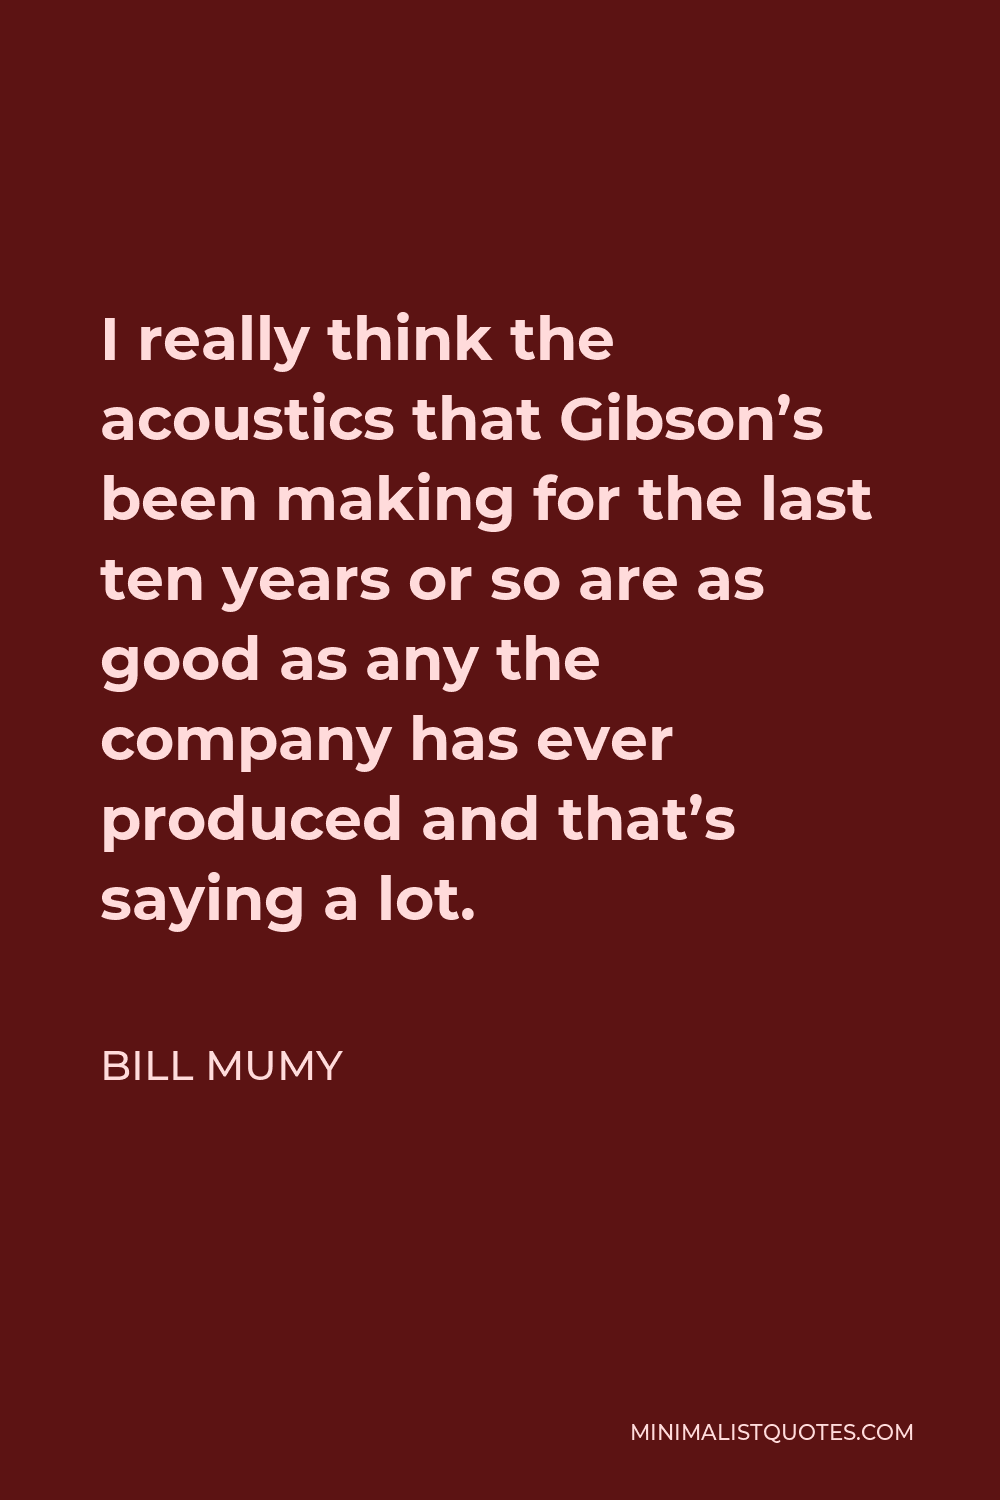 Bill Mumy Quote - I really think the acoustics that Gibson’s been making for the last ten years or so are as good as any the company has ever produced and that’s saying a lot.